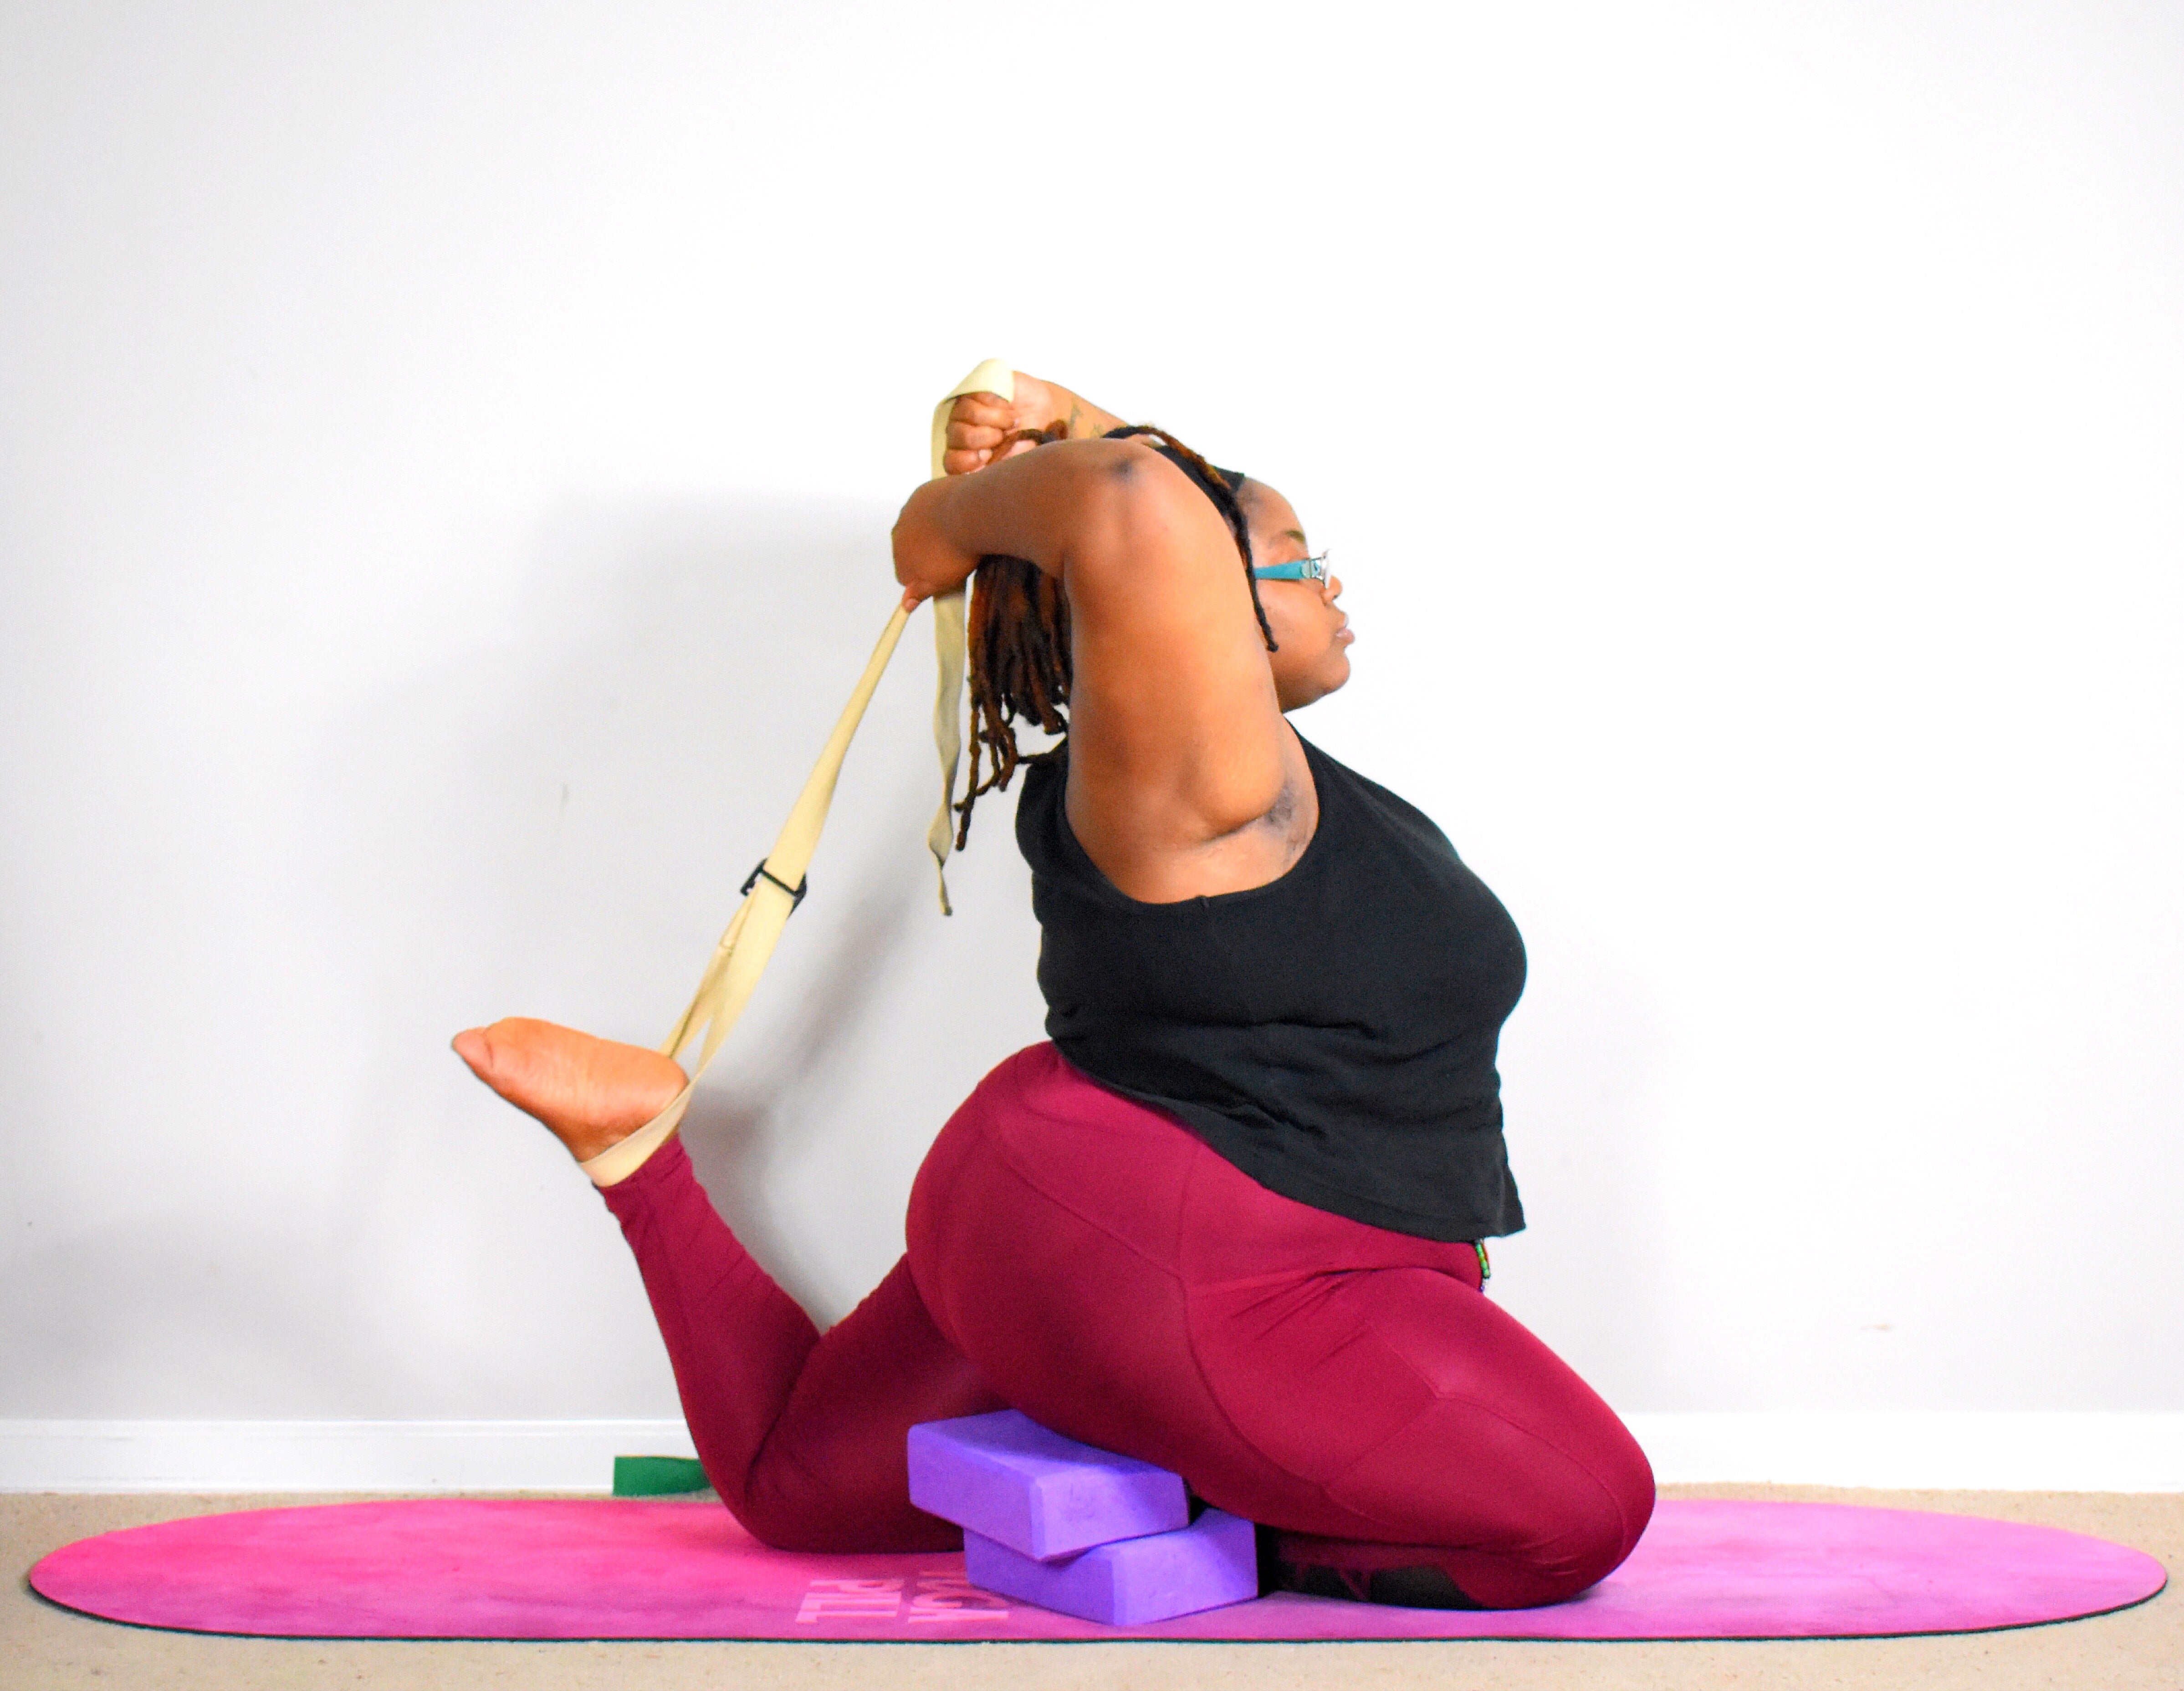 How To Choose The Right Yoga Props - Tips and Recommendations